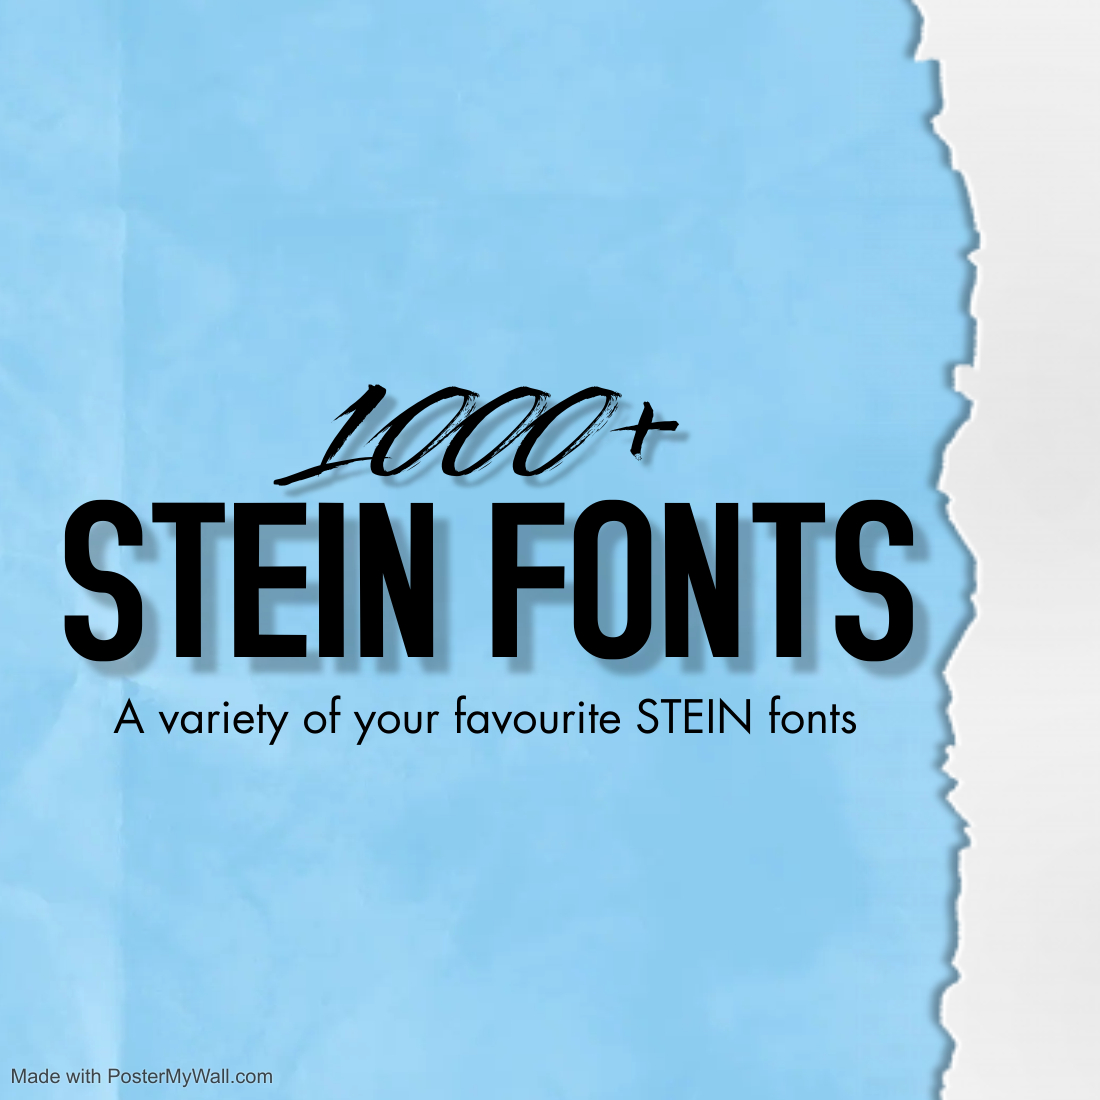 1000+ Special Fonts containing San Serif, Serif, Gothic, Fancy Fonts etc preview image.